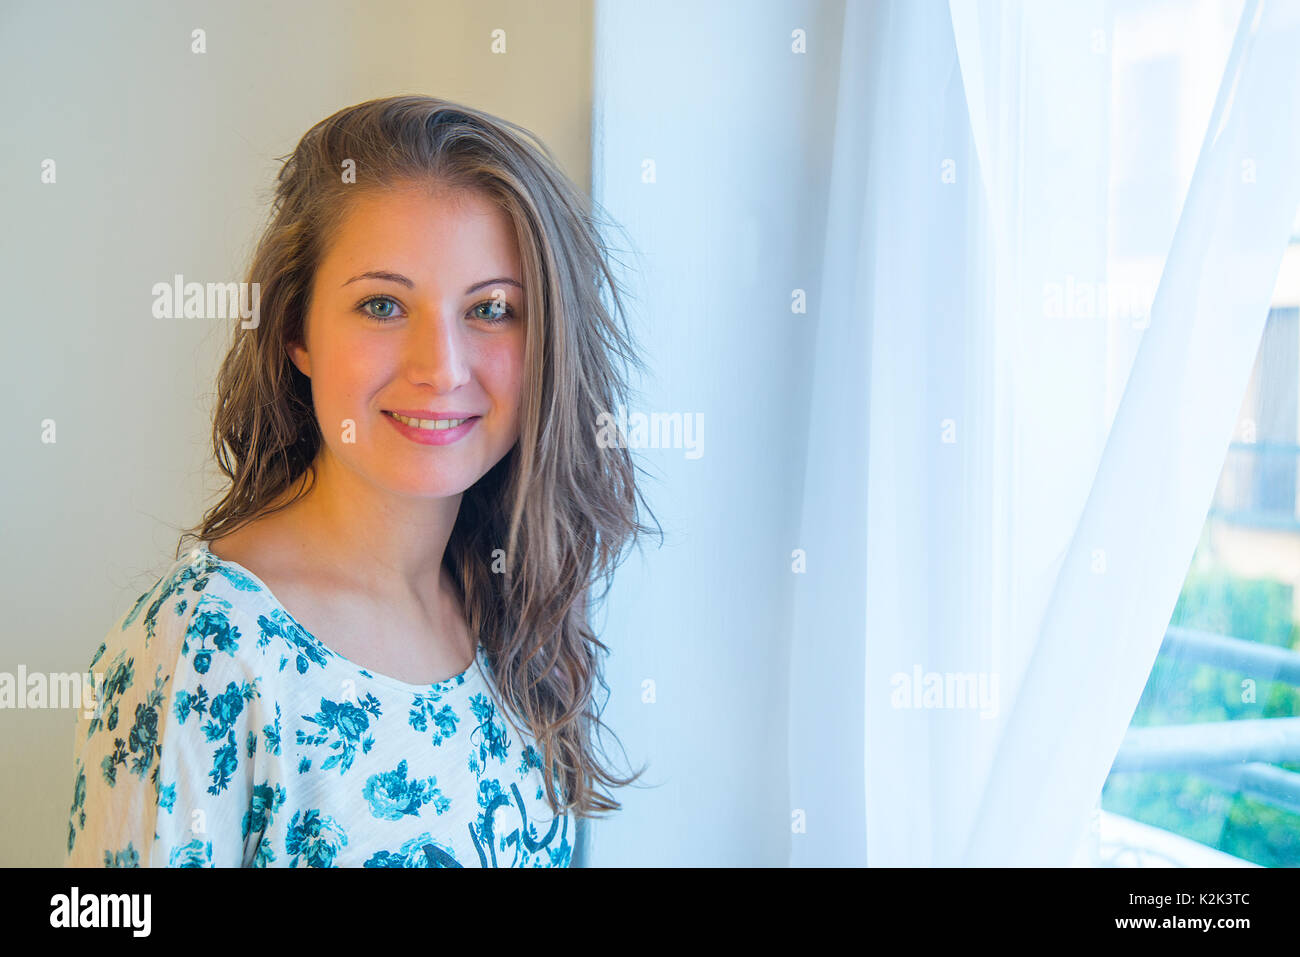 Young woman by the window, smiling and looking at the camera. Stock Photo